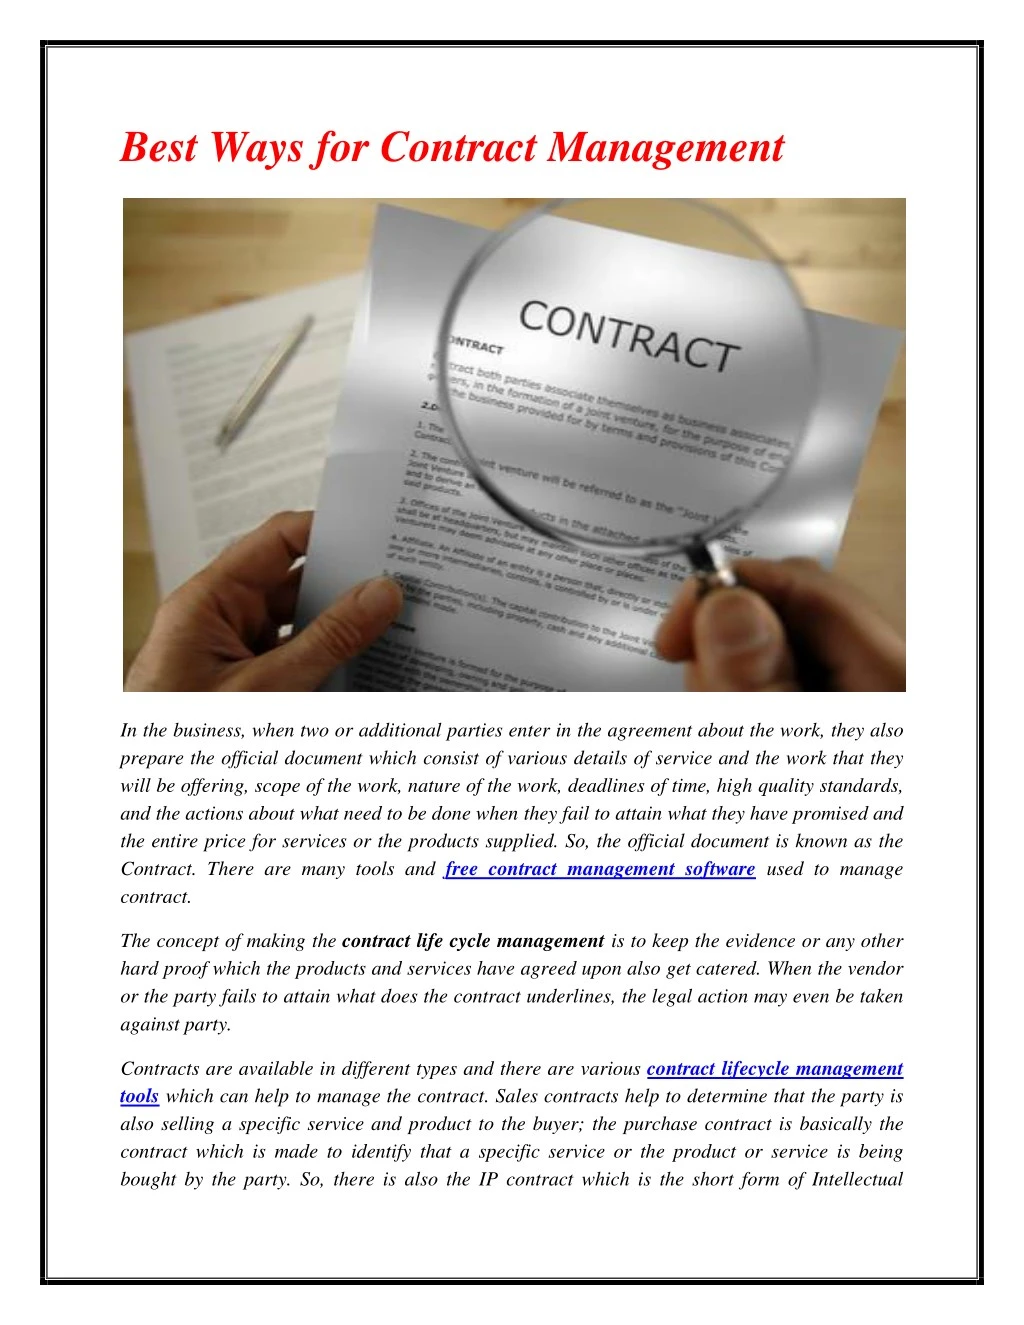 best ways for contract management